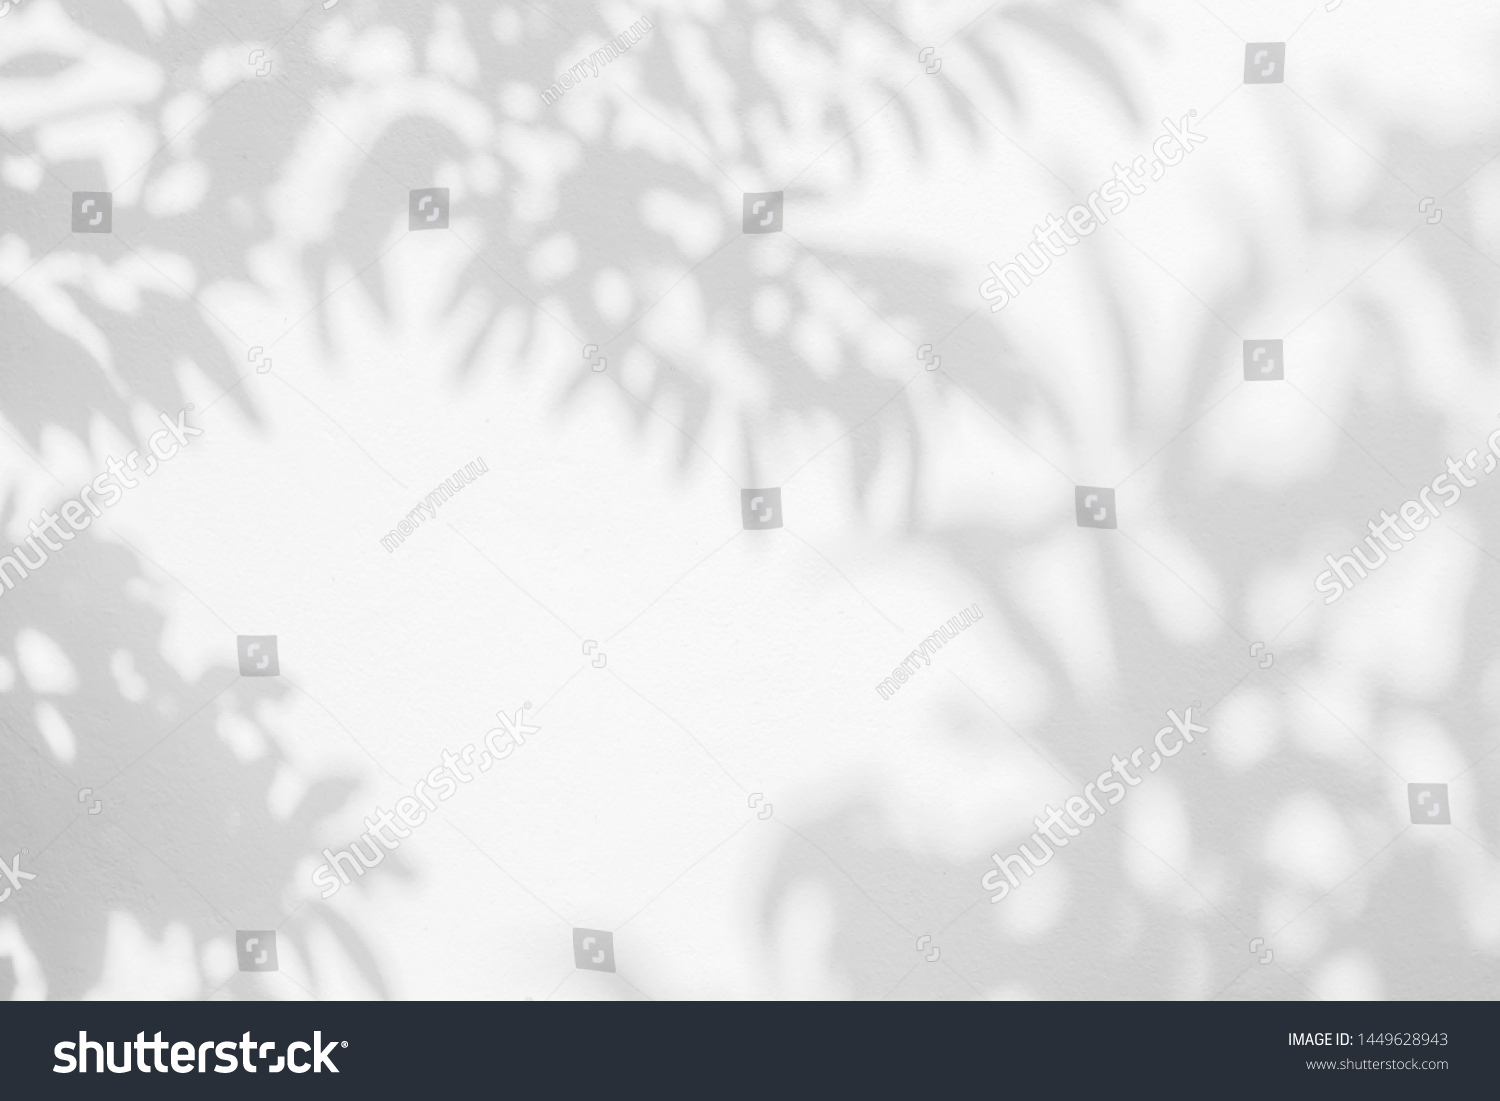 Abstract leaves shadow branch of tree background on white concrete wall texture , black and white, monochrome, nature shadow art on wall
 #1449628943